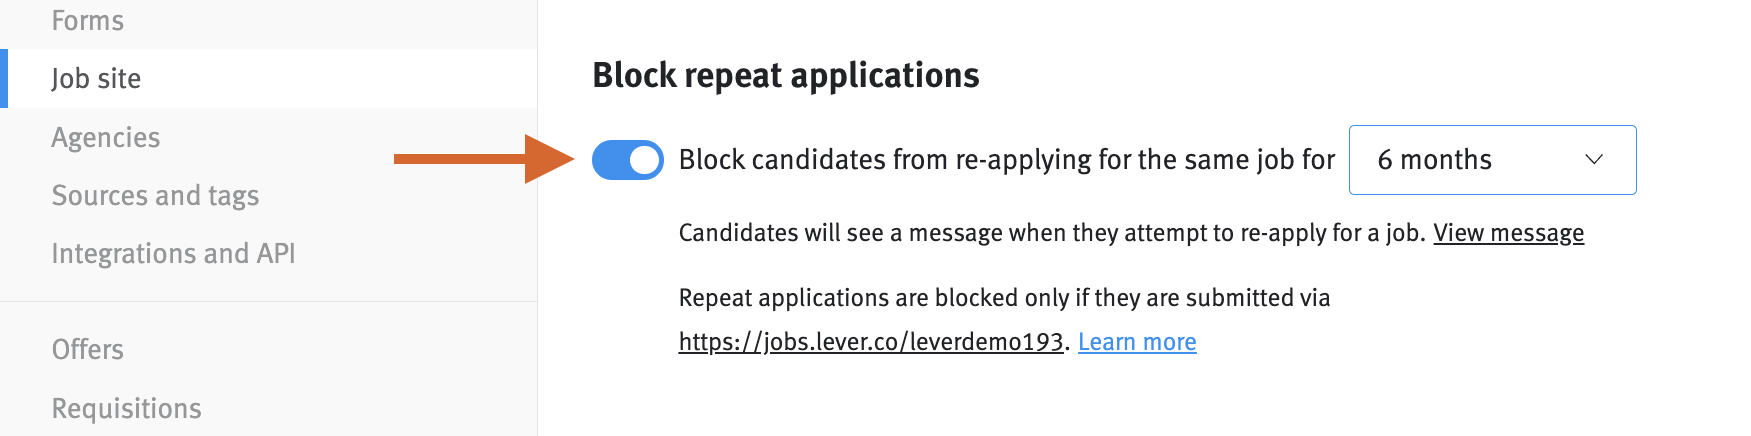 Job site settings with arrow pointing to block candidates toggle